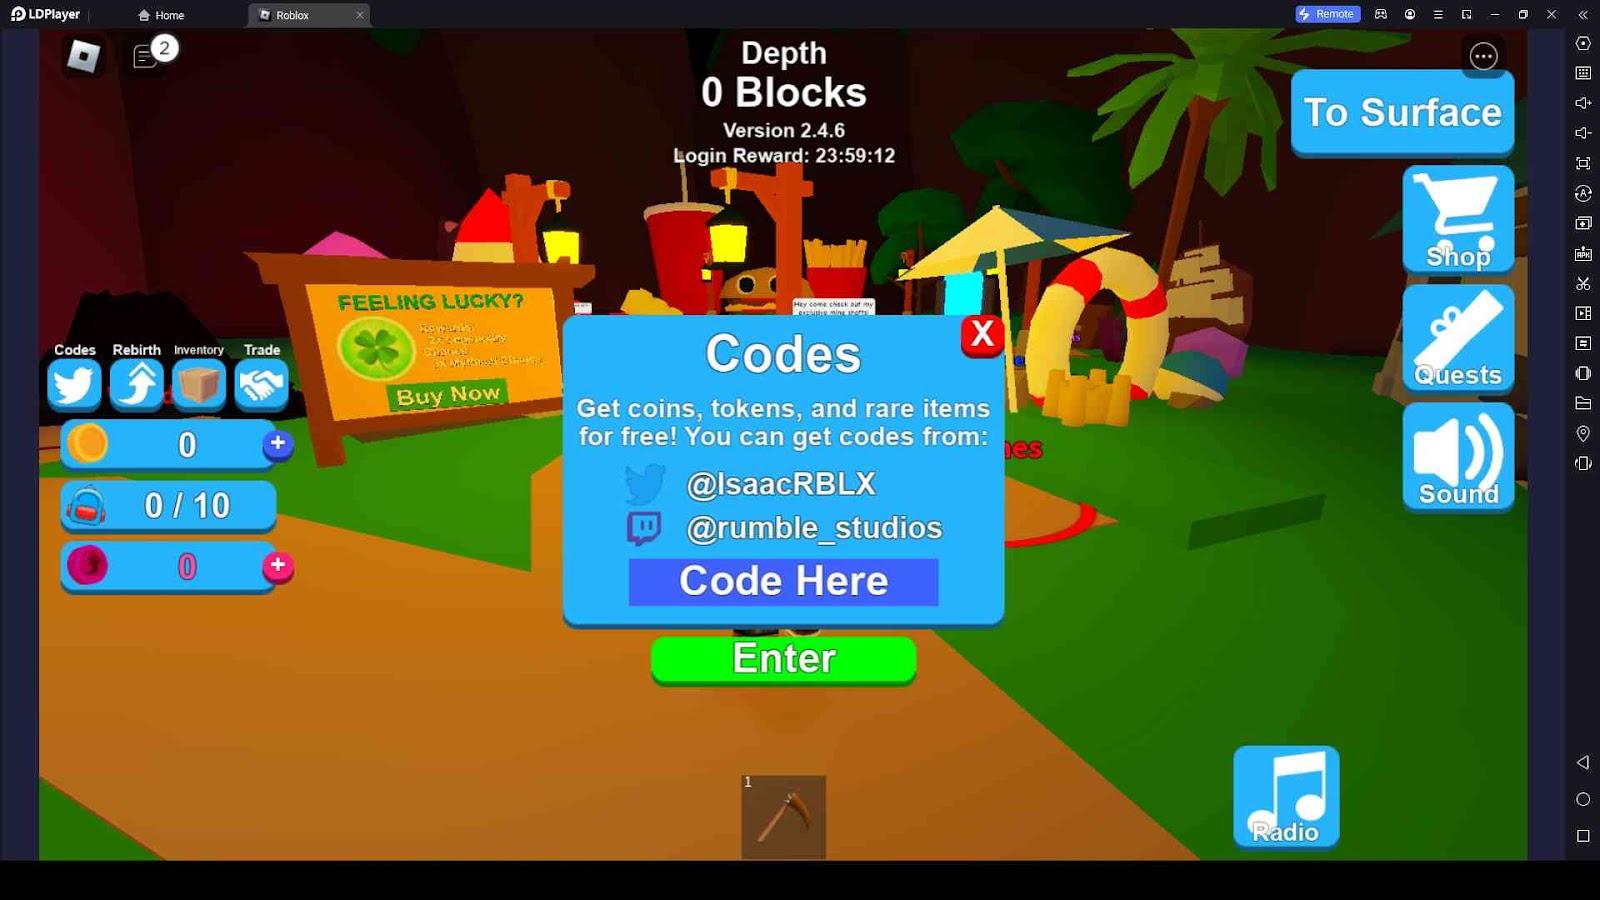 2022) *NEW* ALL WORKING CODES In Mining Simulator 2! ROBLOX MINING